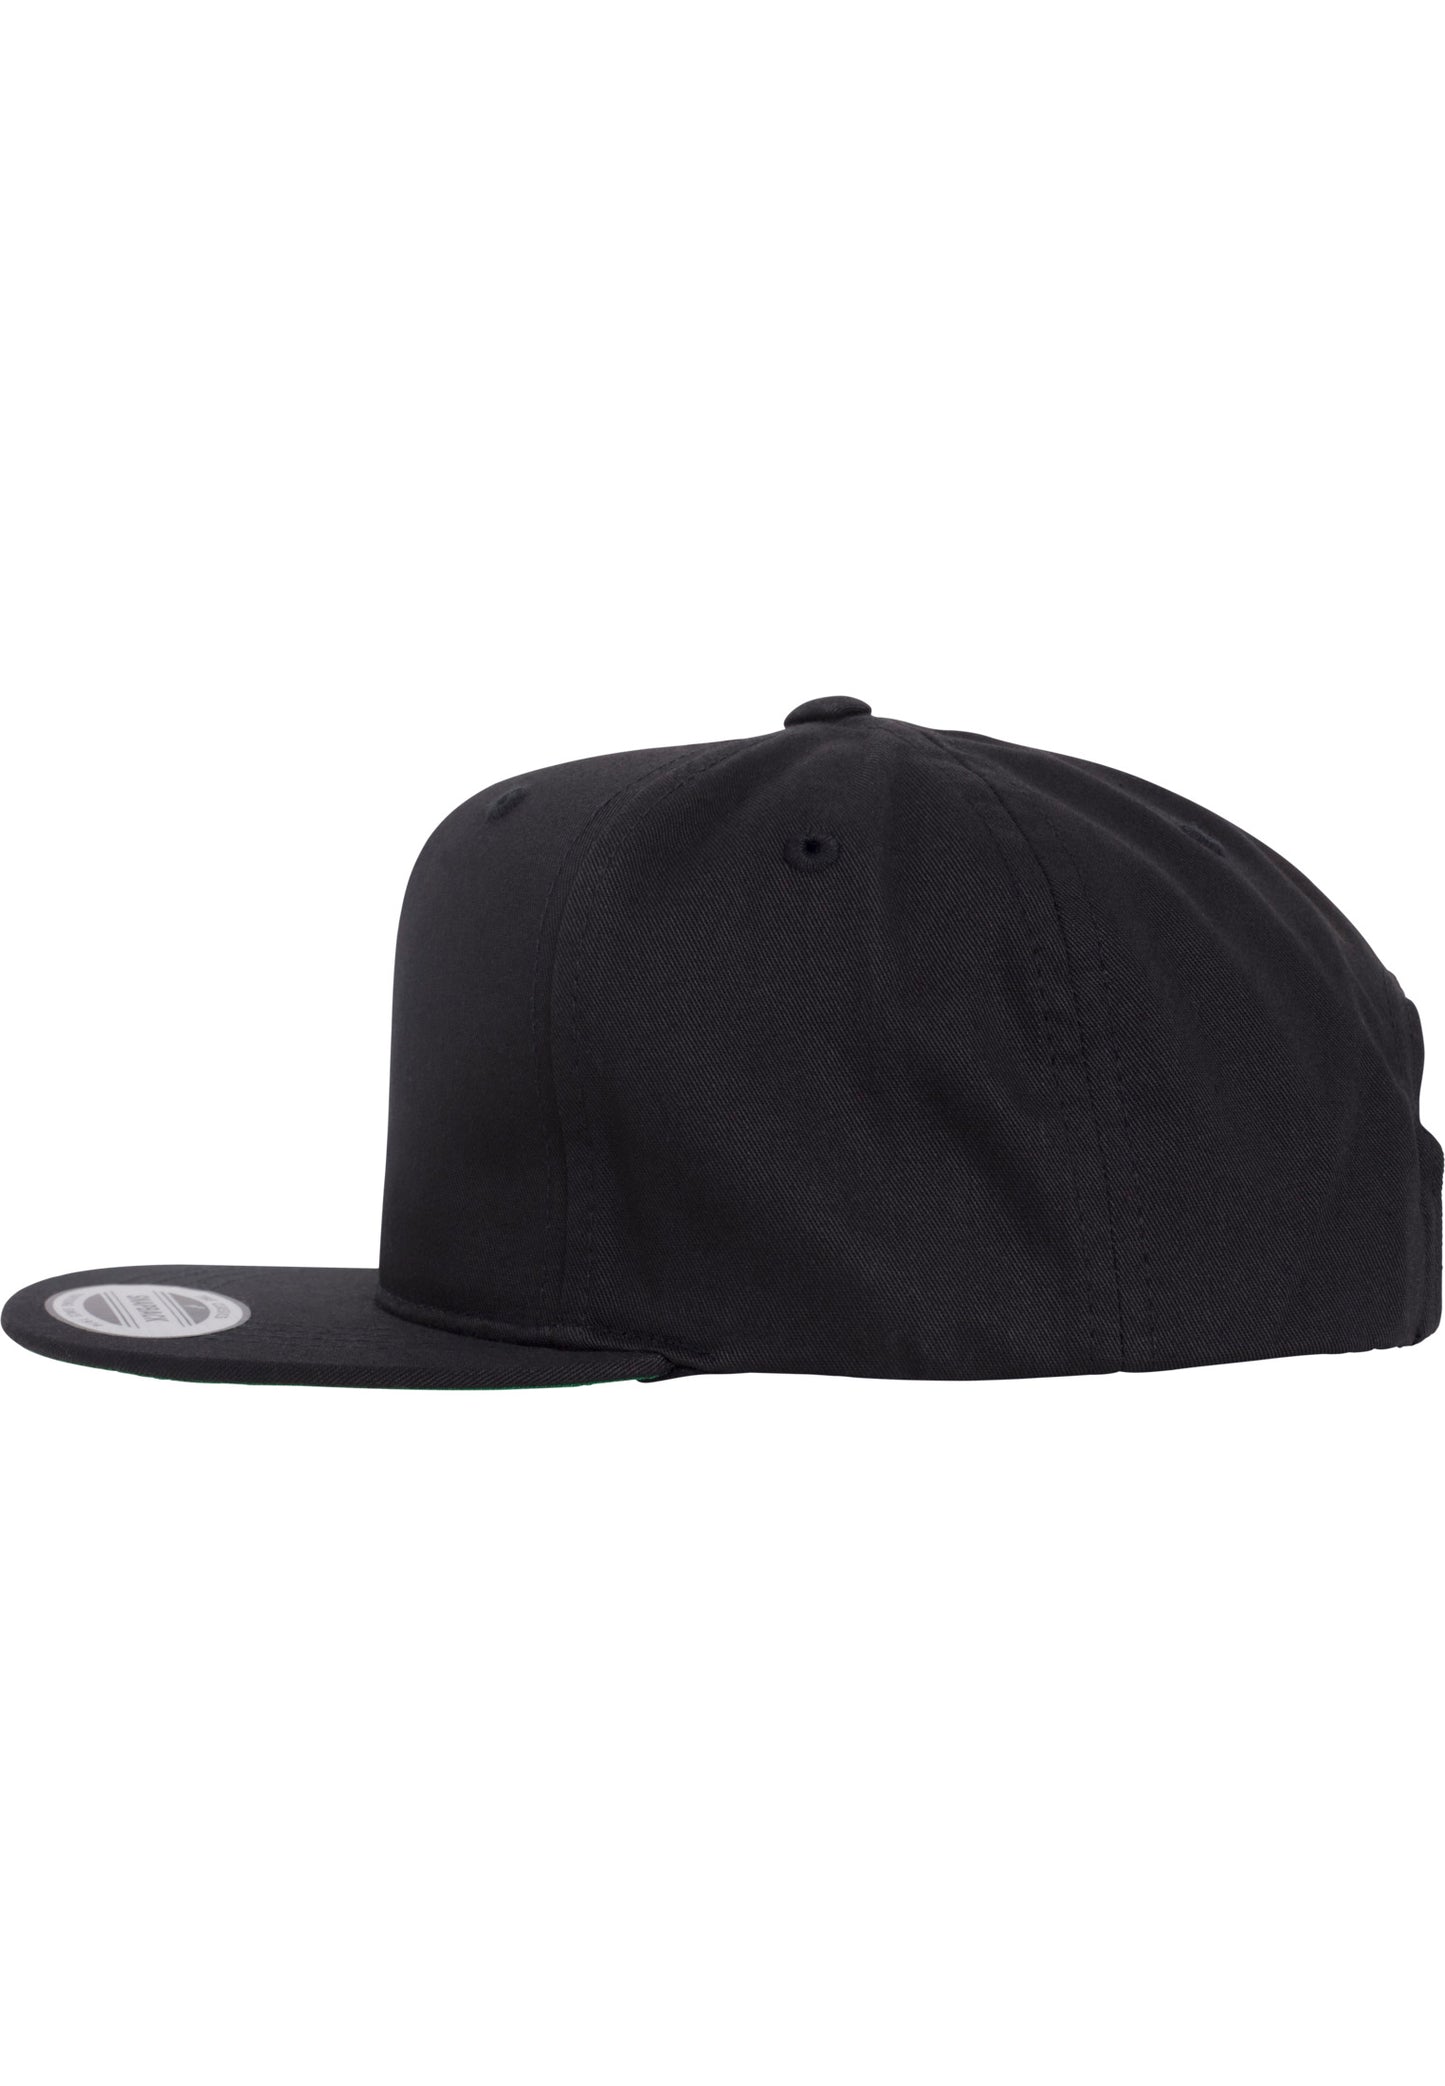 Pro-Style Twill Snapback Youth Cap  J (Ages 2-6)